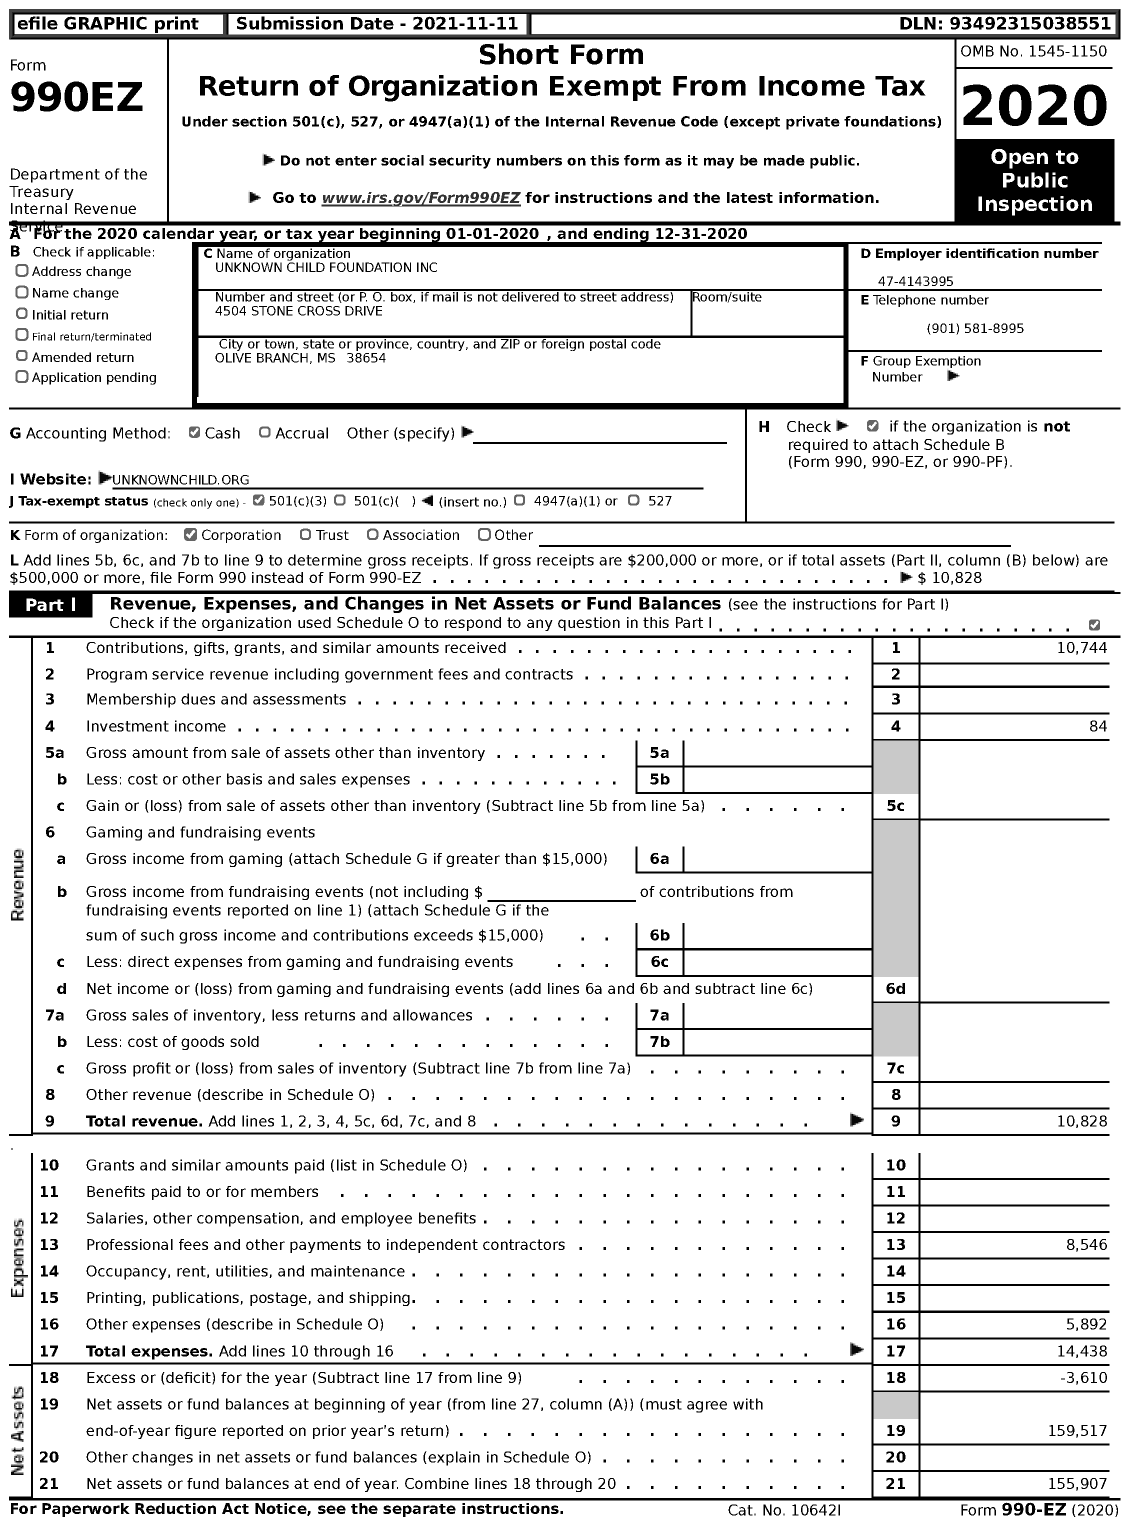 Image of first page of 2020 Form 990EZ for Unknown Child Foundation